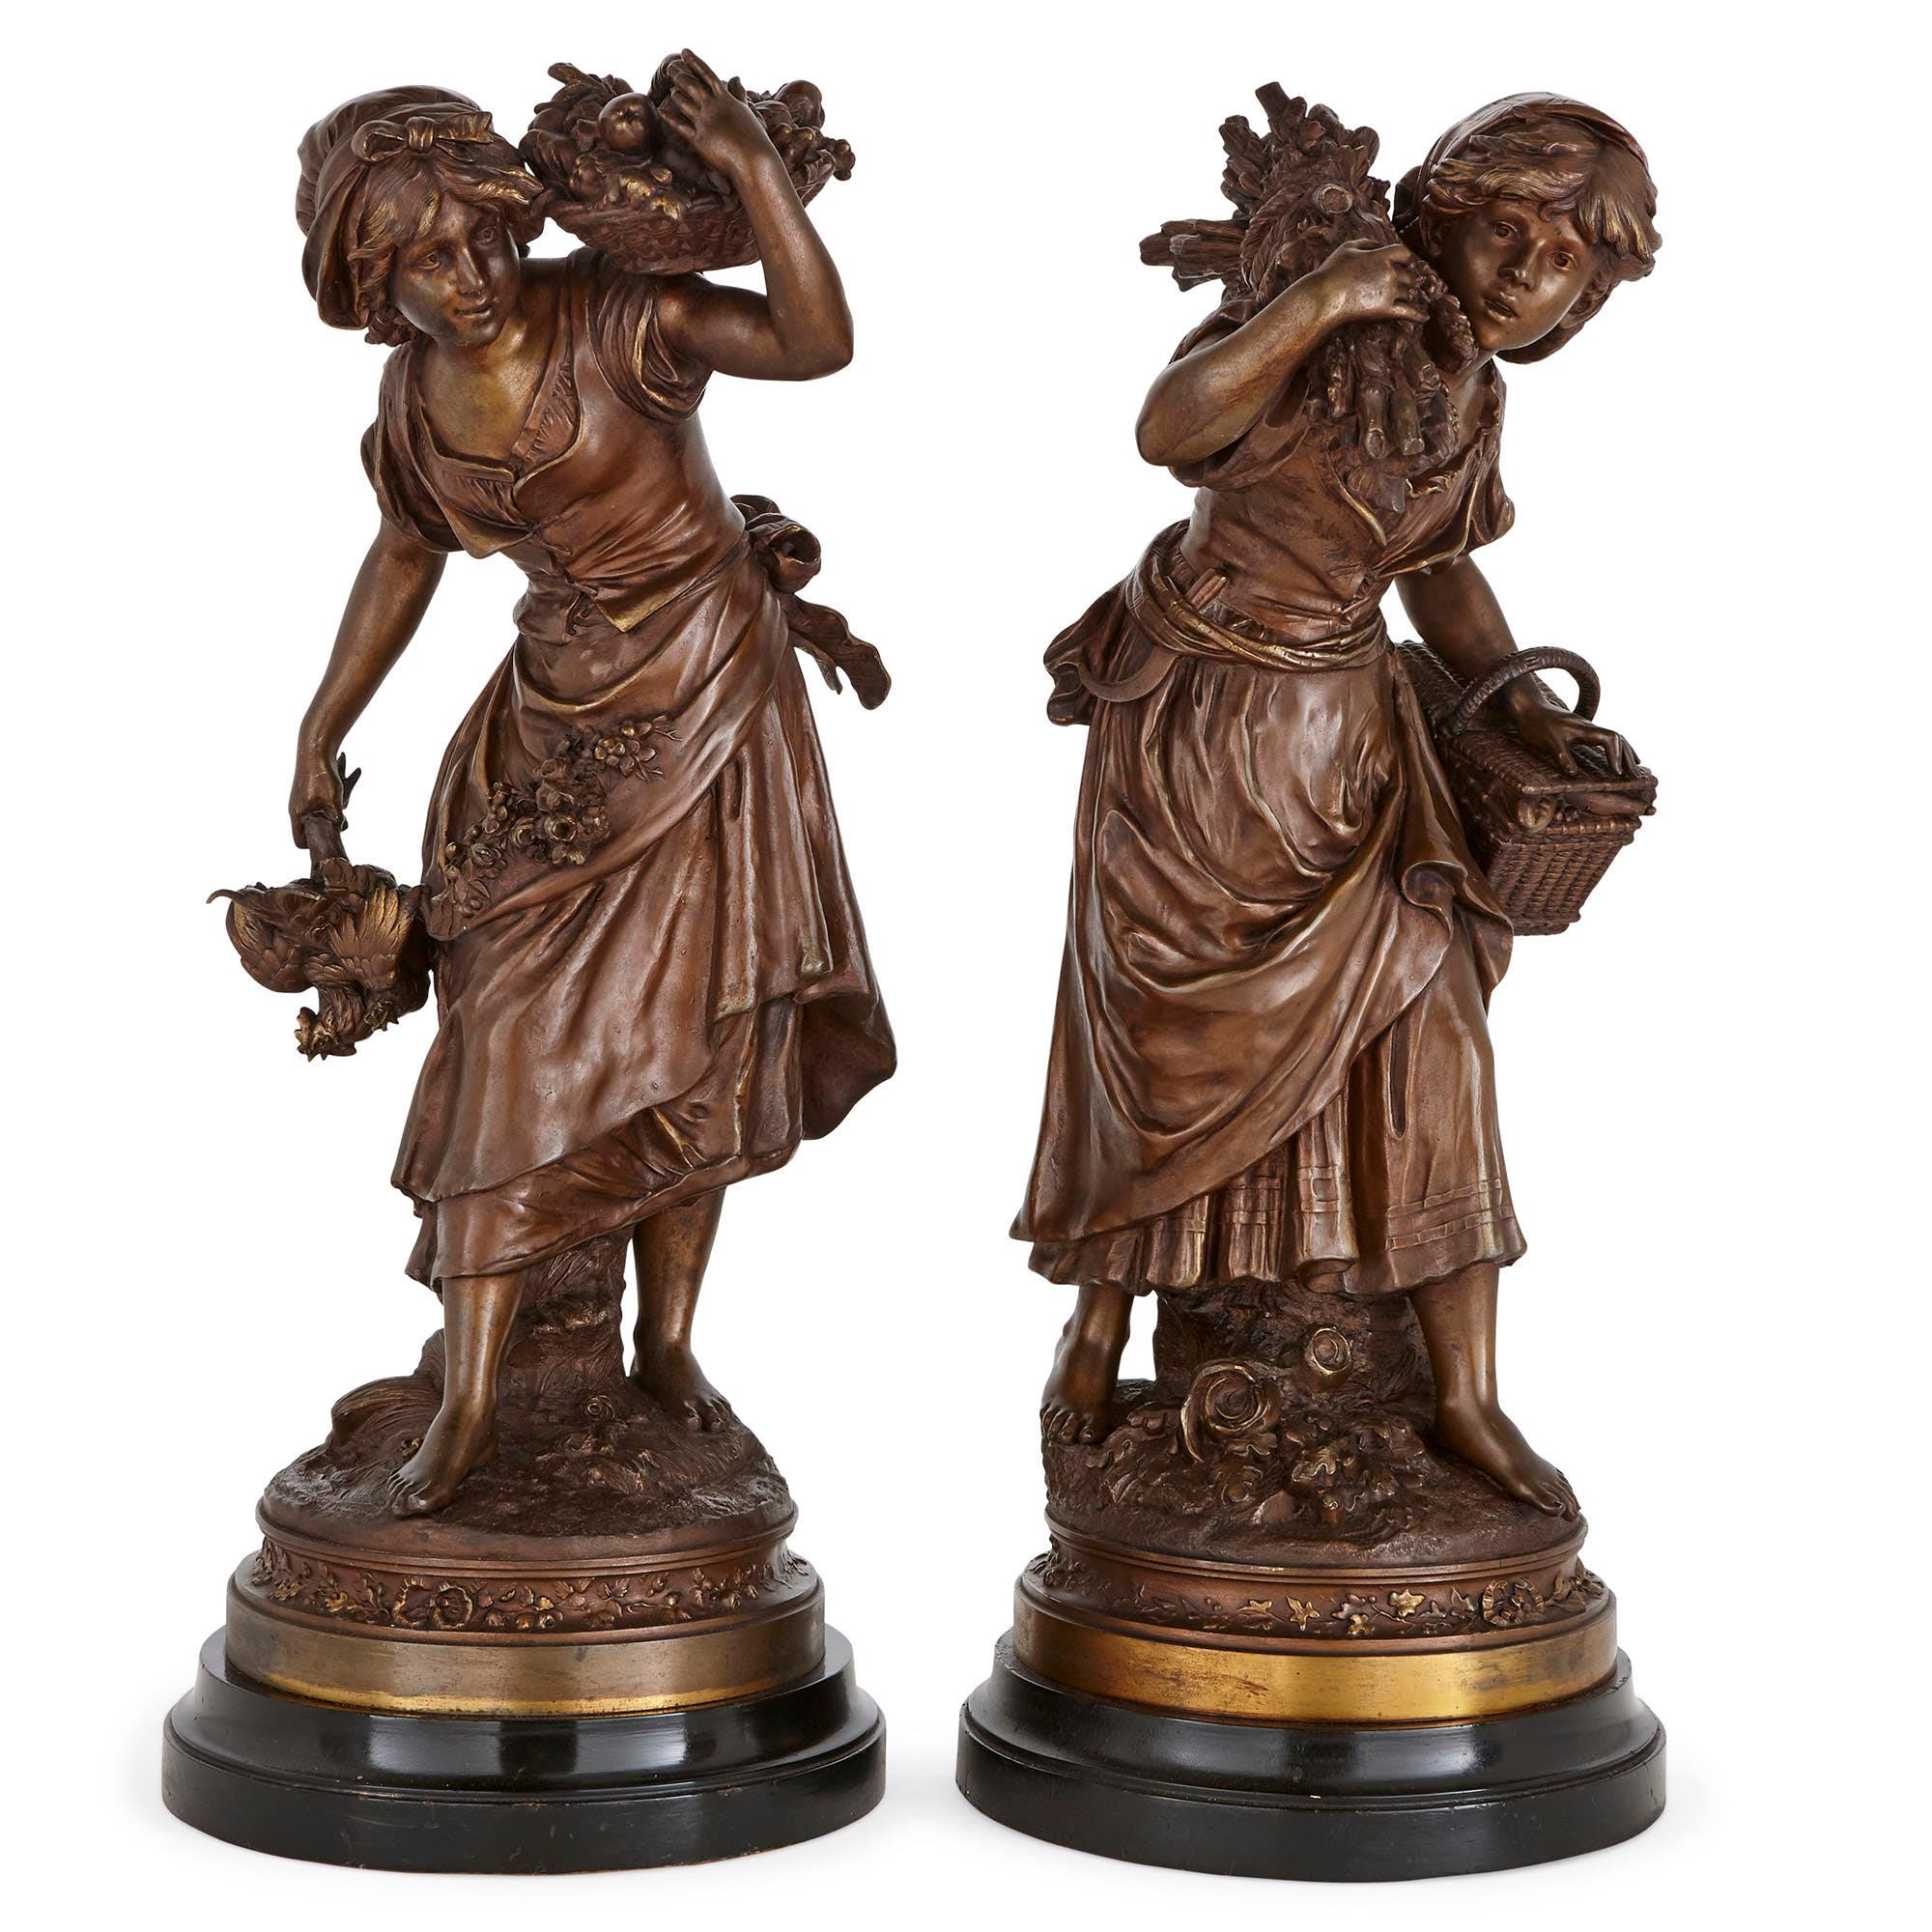 These graceful sculptures were created in the late 19th century by the prestigious French sculptor, Auguste Moreau (1834-1917). Auguste was born into a family of artists, which included his father Jean-Baptiste and his two older brothers Hippotyle